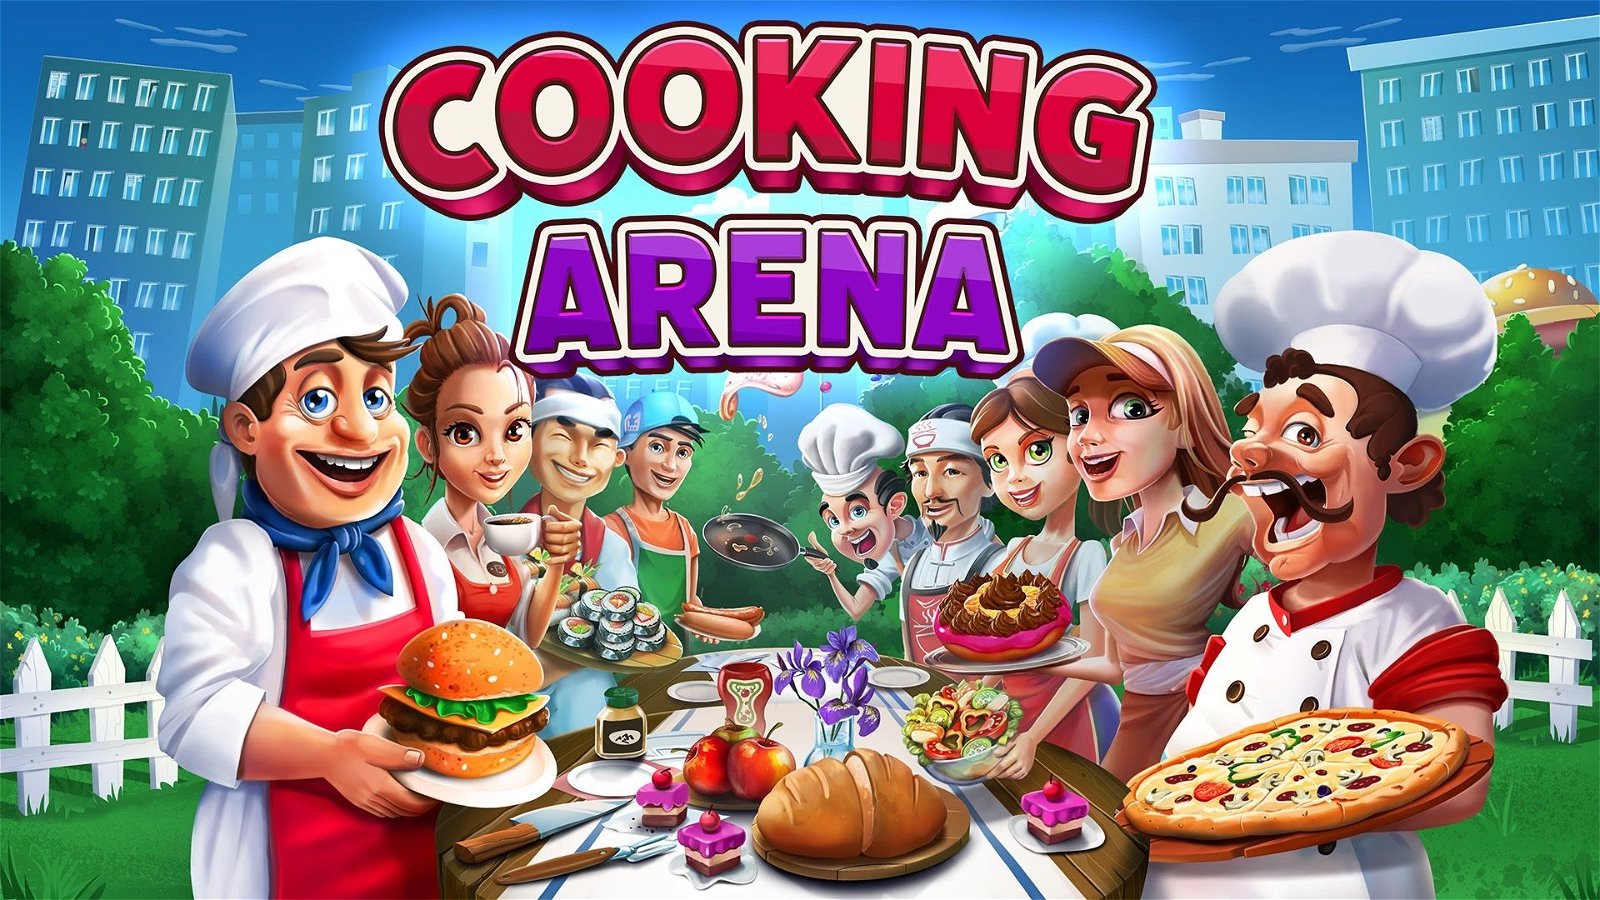 Image of Cooking Arena